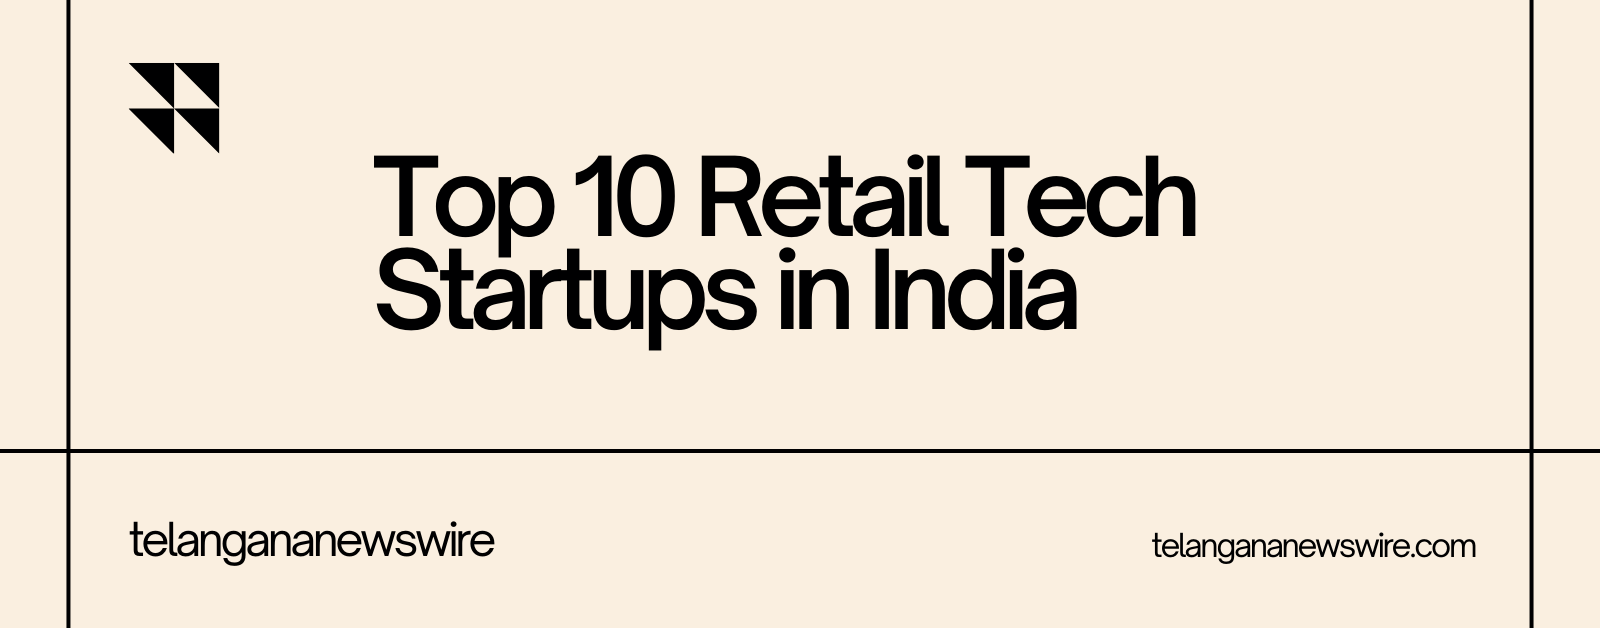 Top 10 Retail Tech Startups in India